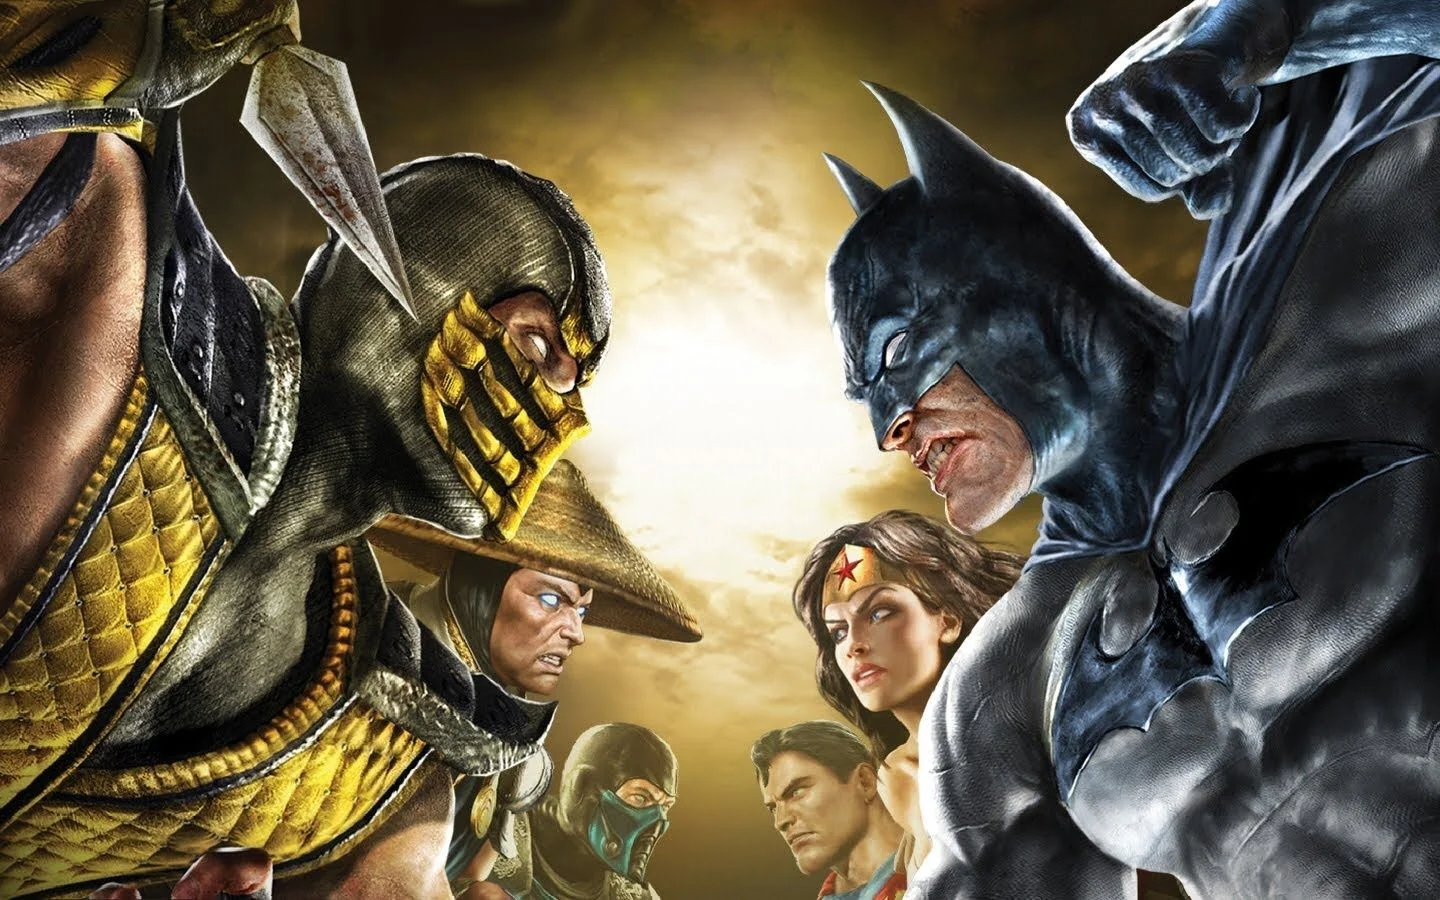 AI showed Mortal Kombat characters as superheroes and villains from DC comics